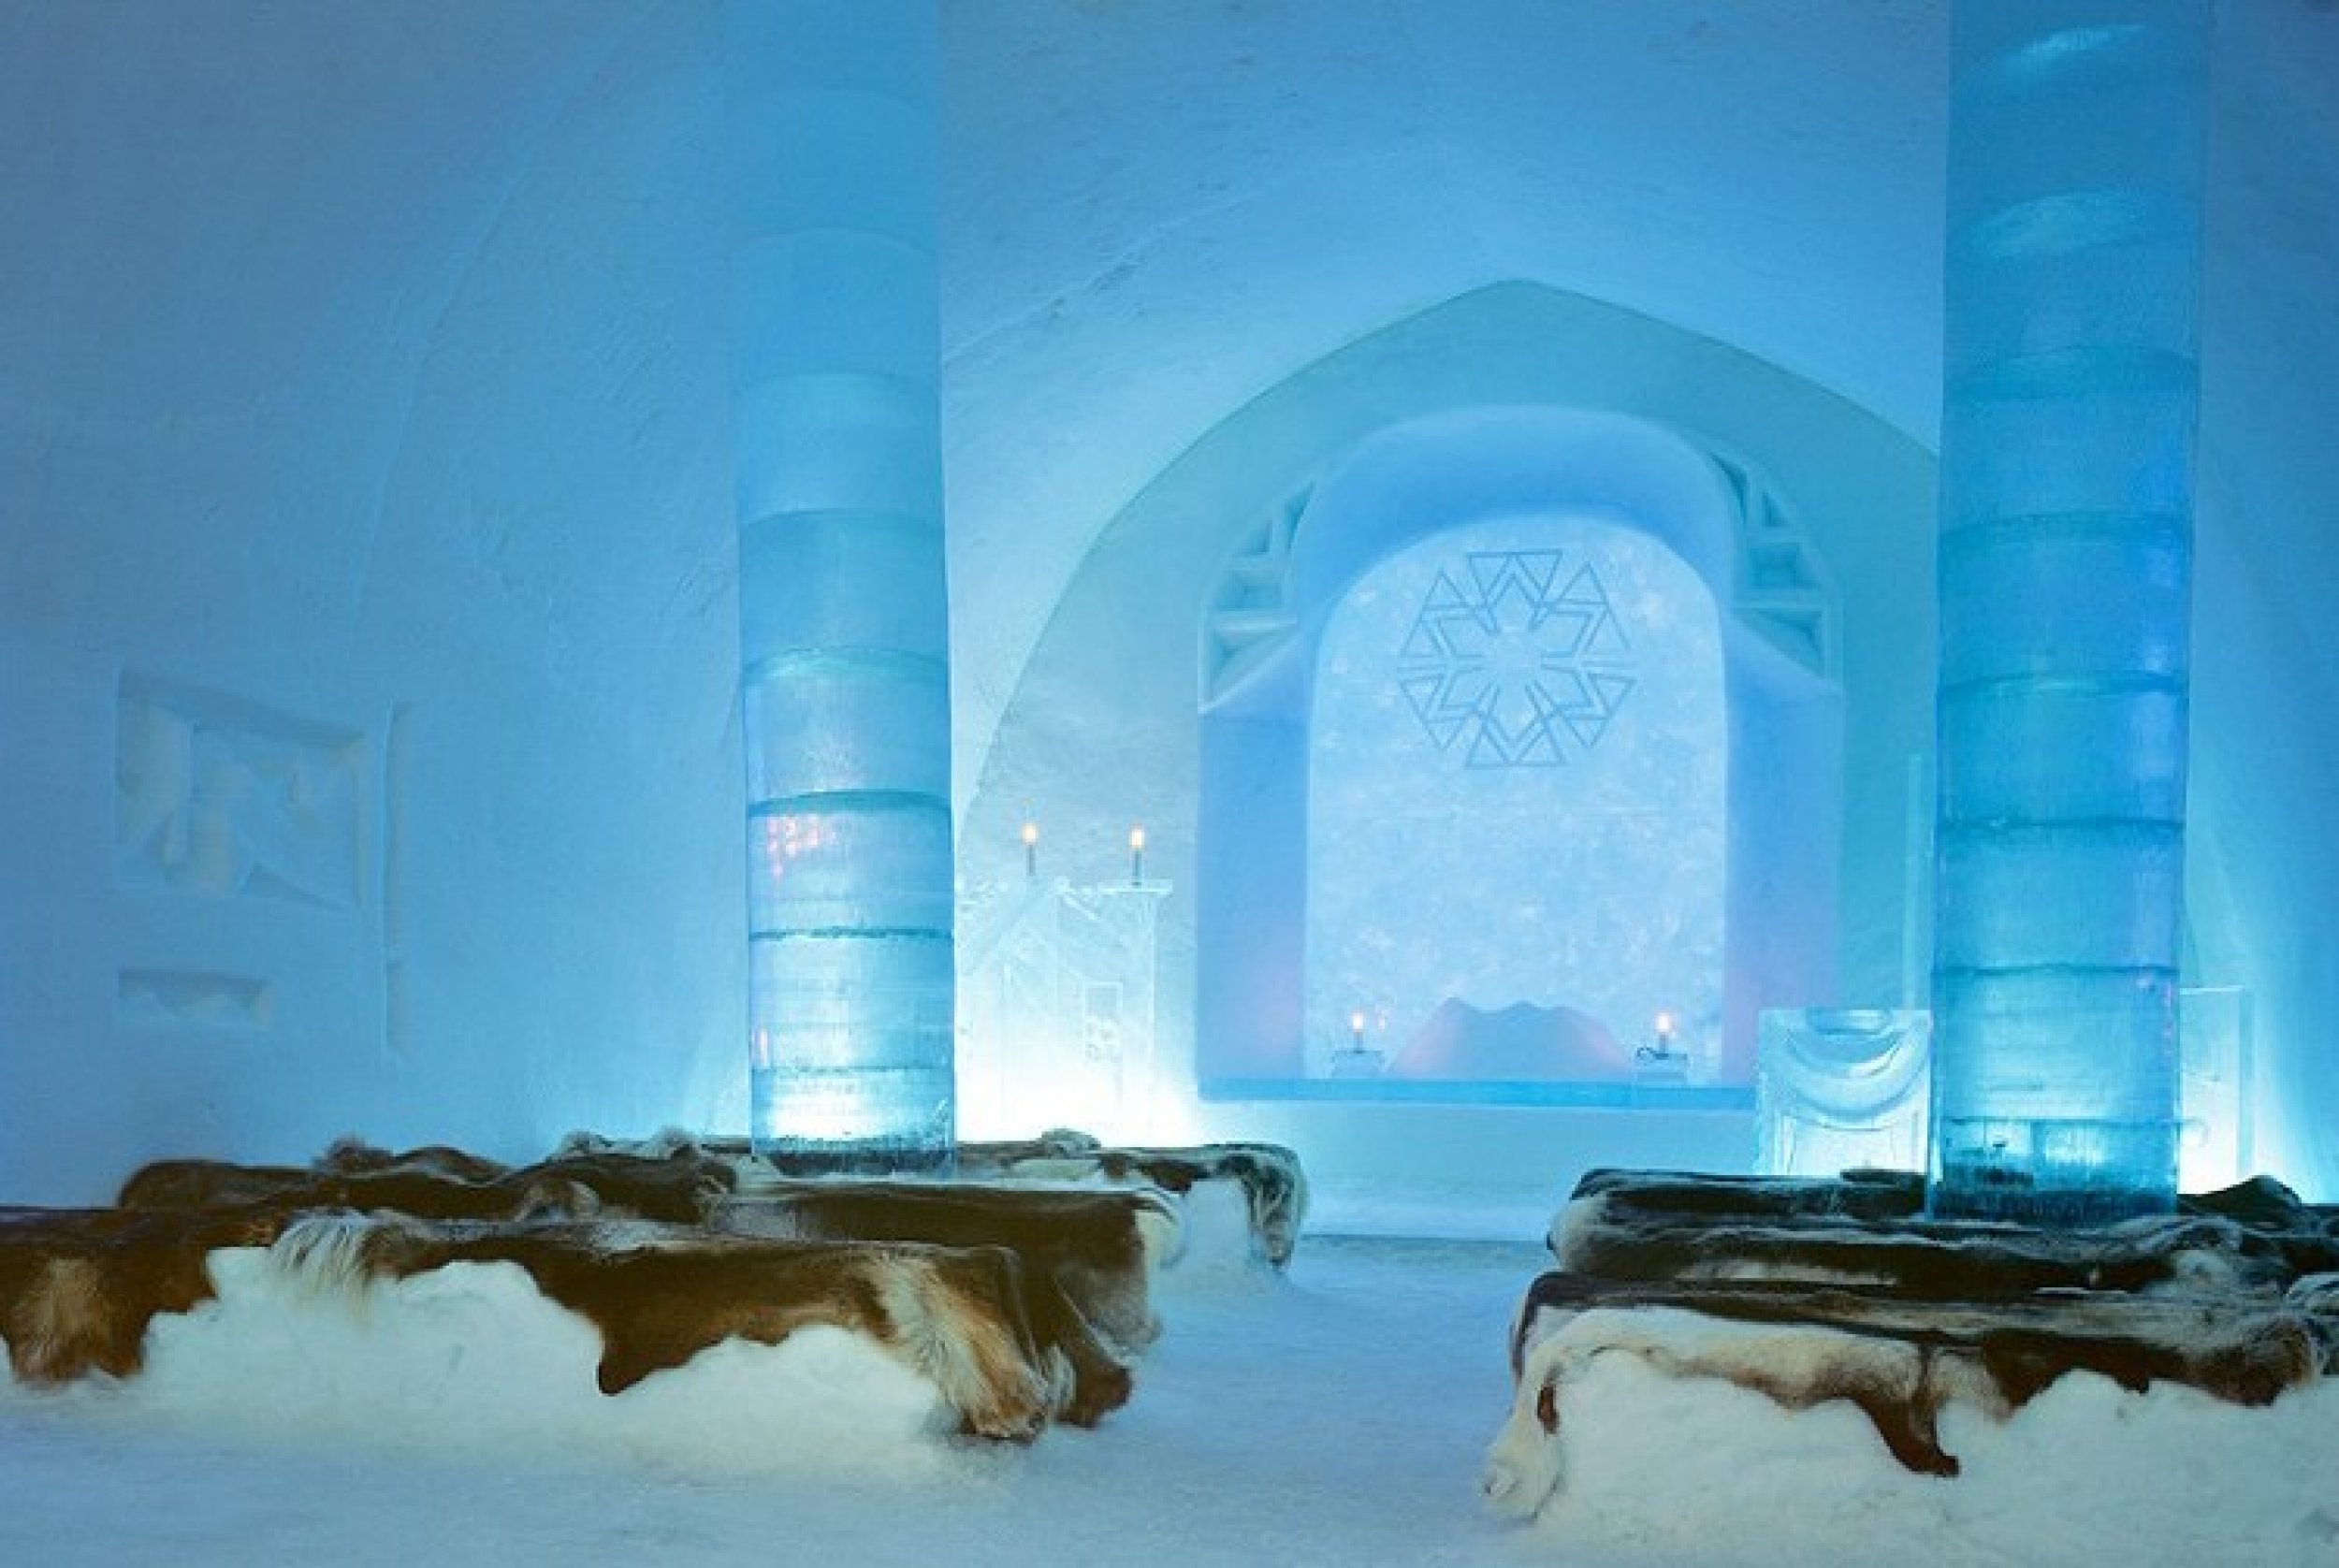 Bed of ice, Icehotel in Swedish Lapland